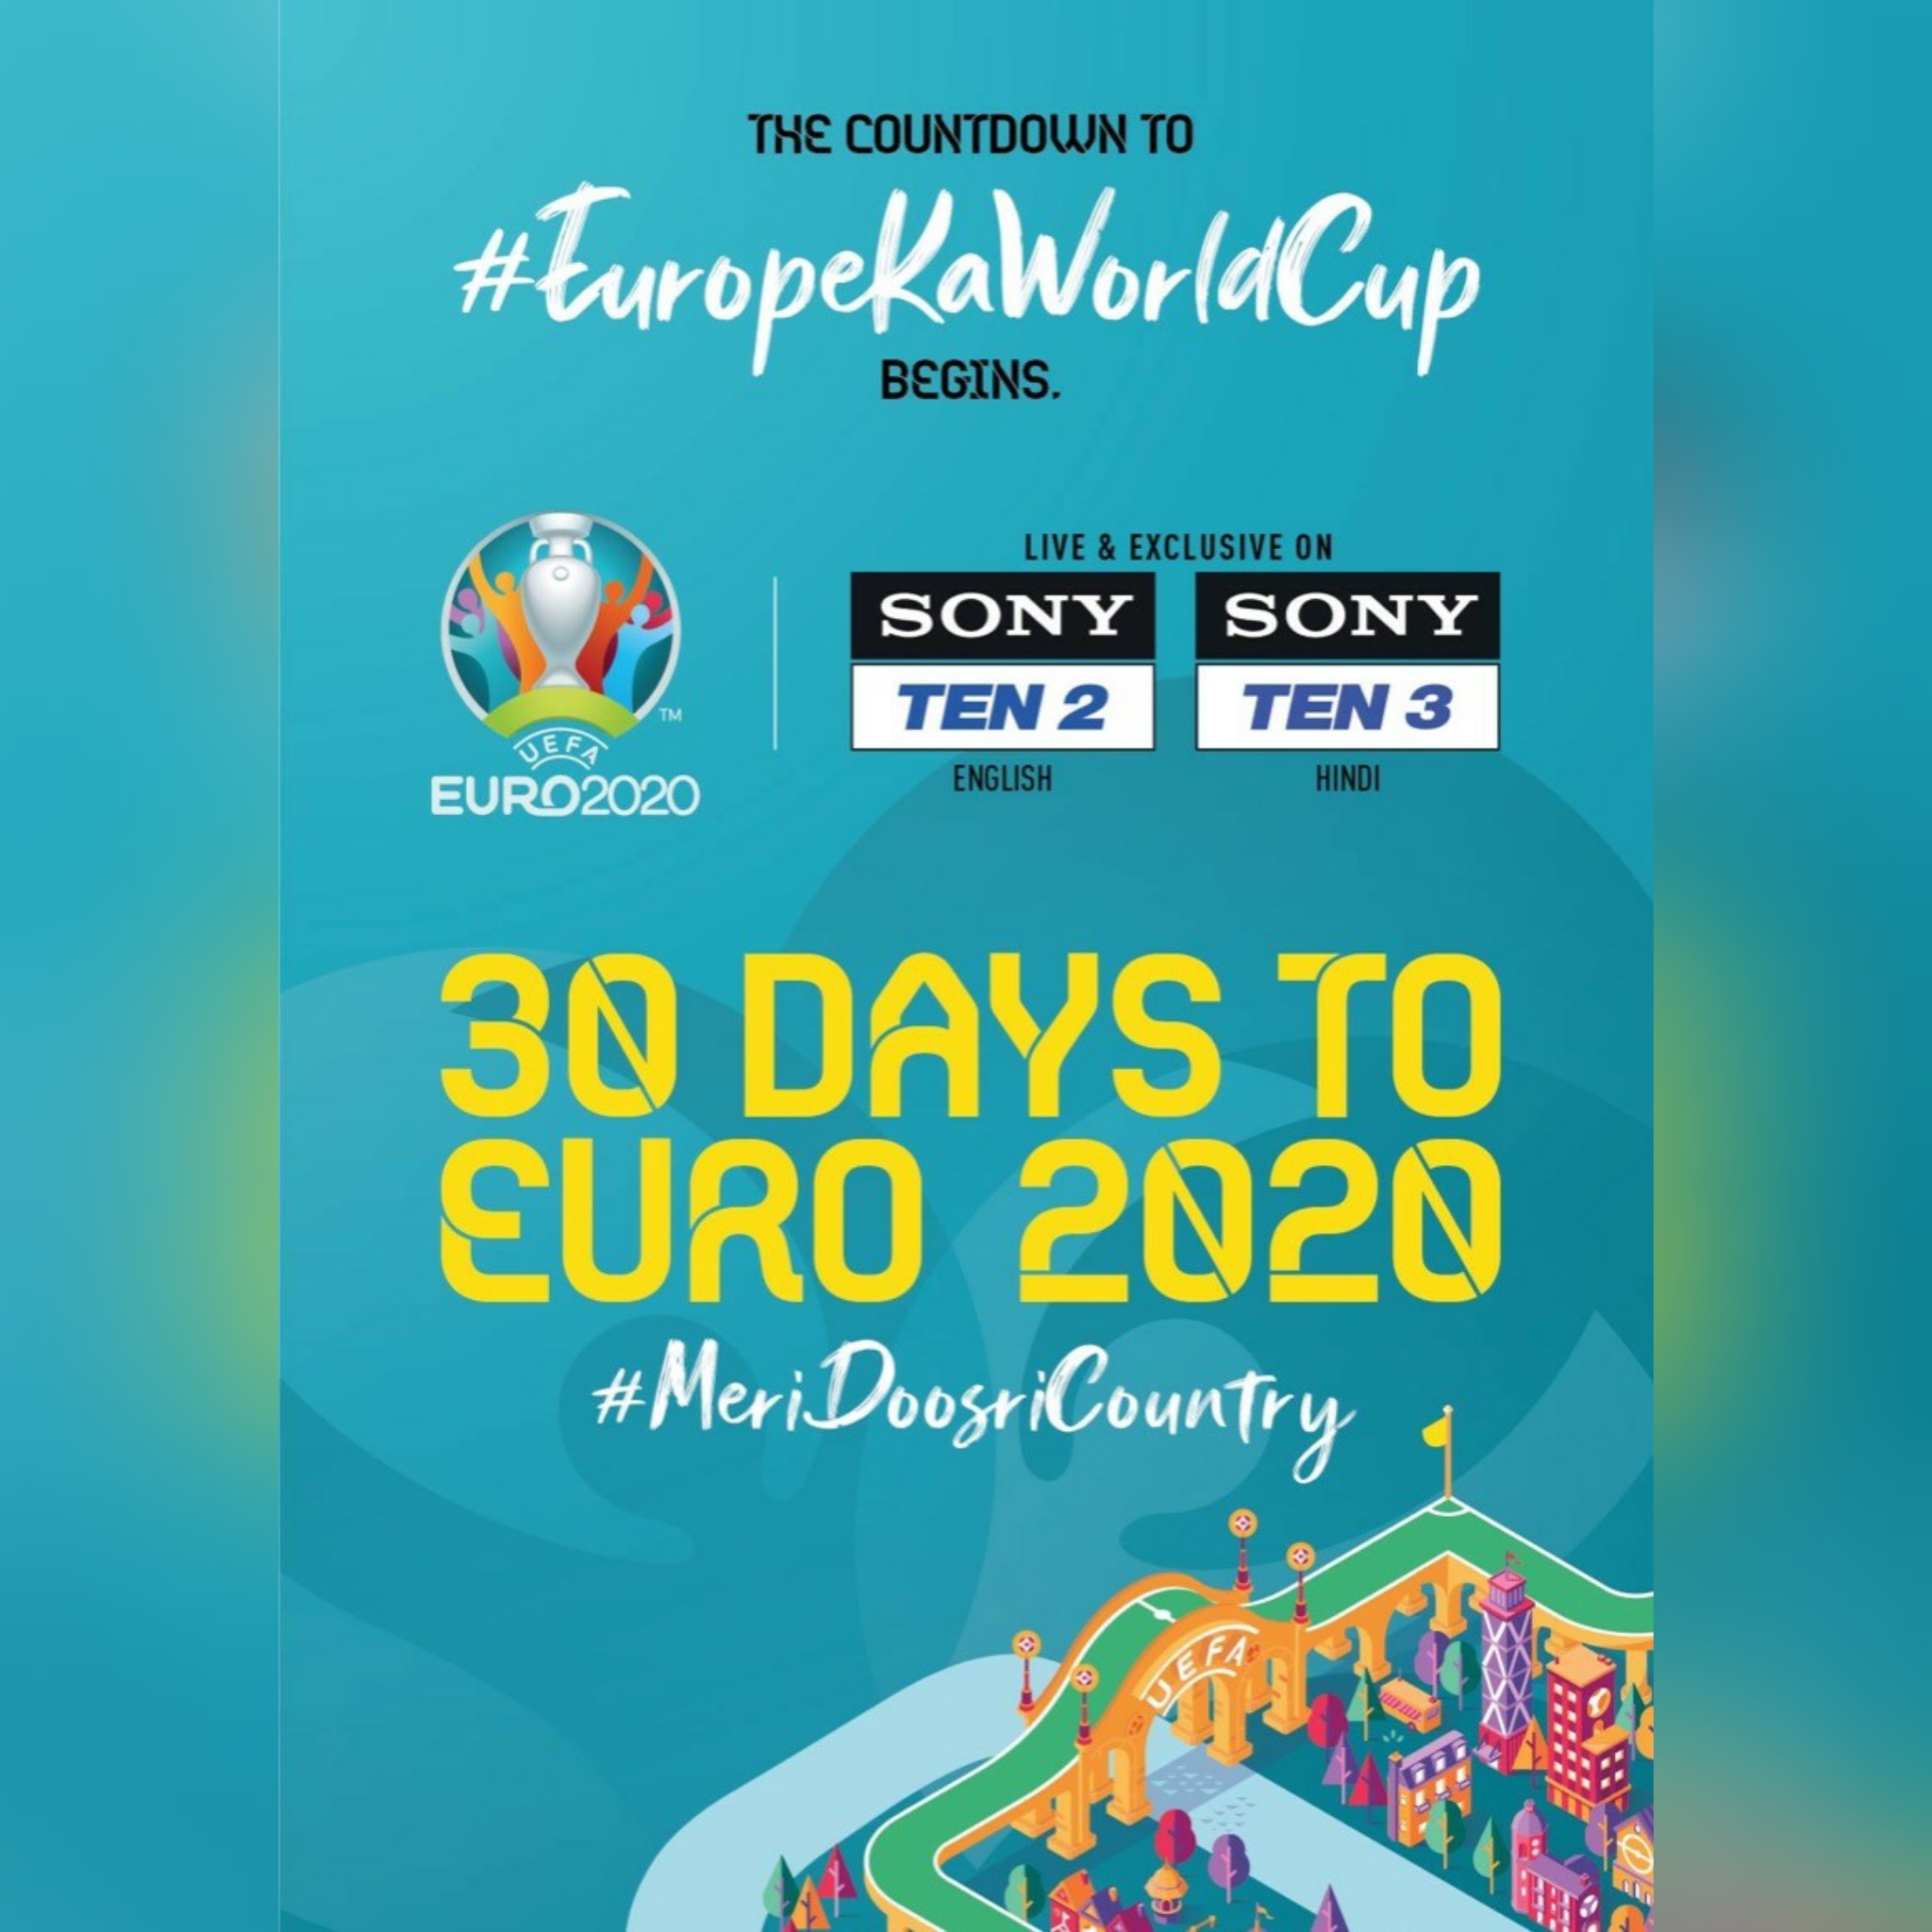 Euro cup live 2021